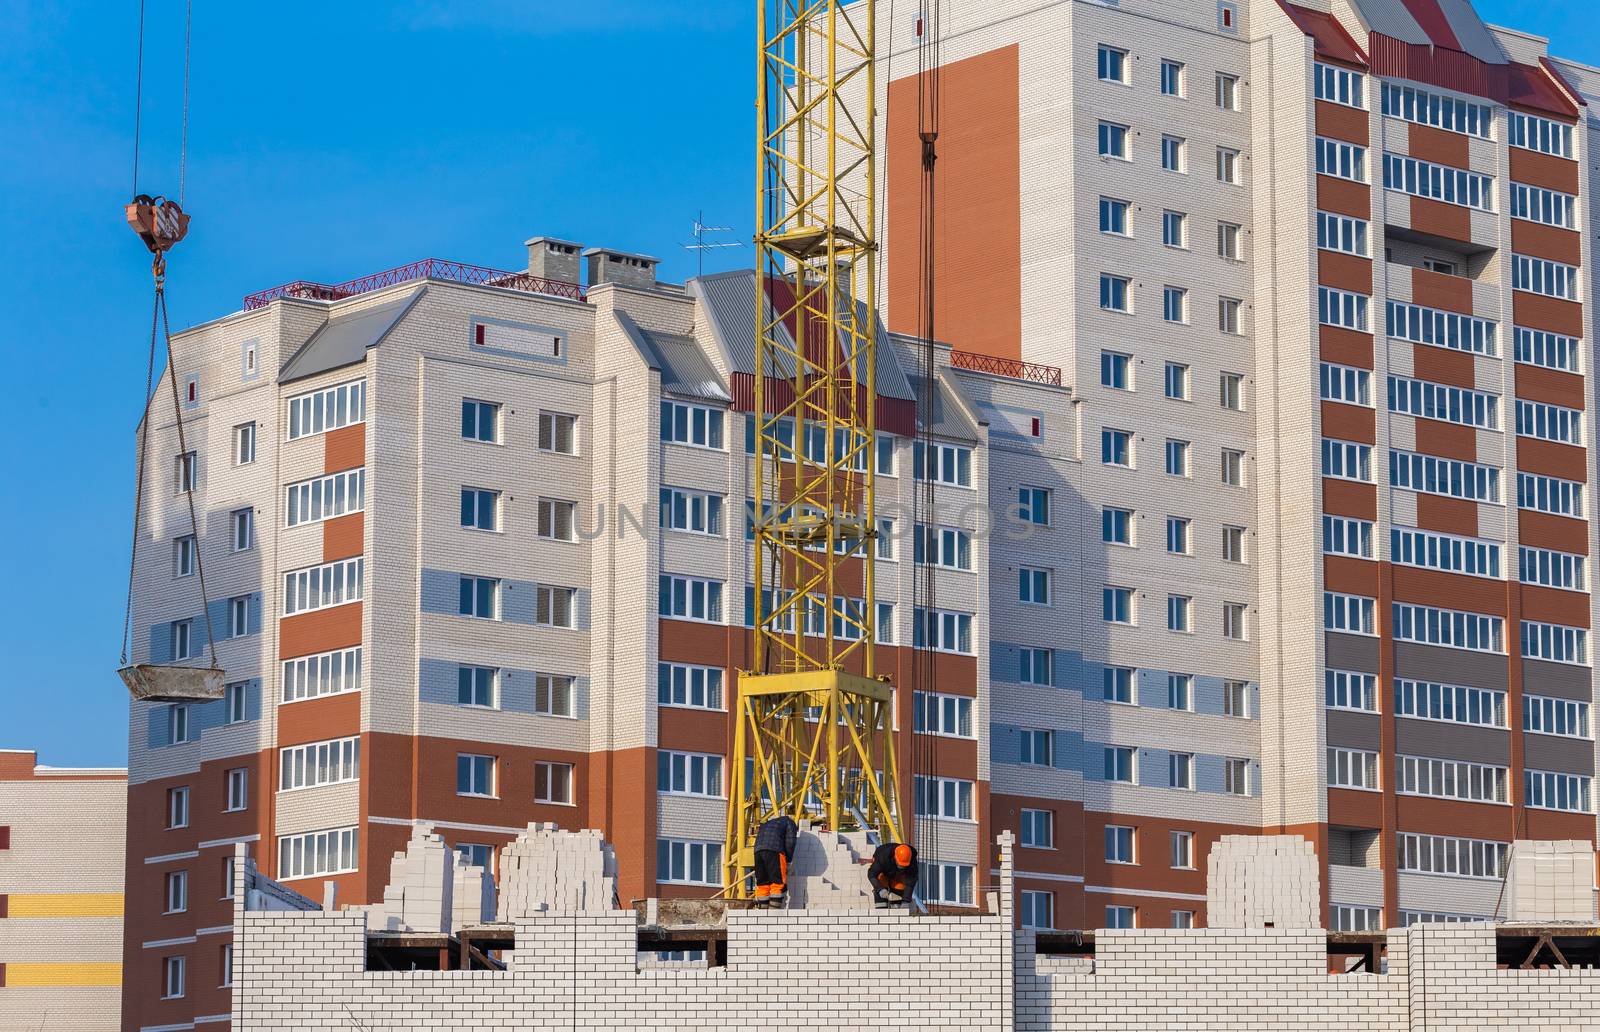 Construction site. Unfinished apartment buildings. Construction workers laying bricks. Special crane in the middle. Blue sky background.